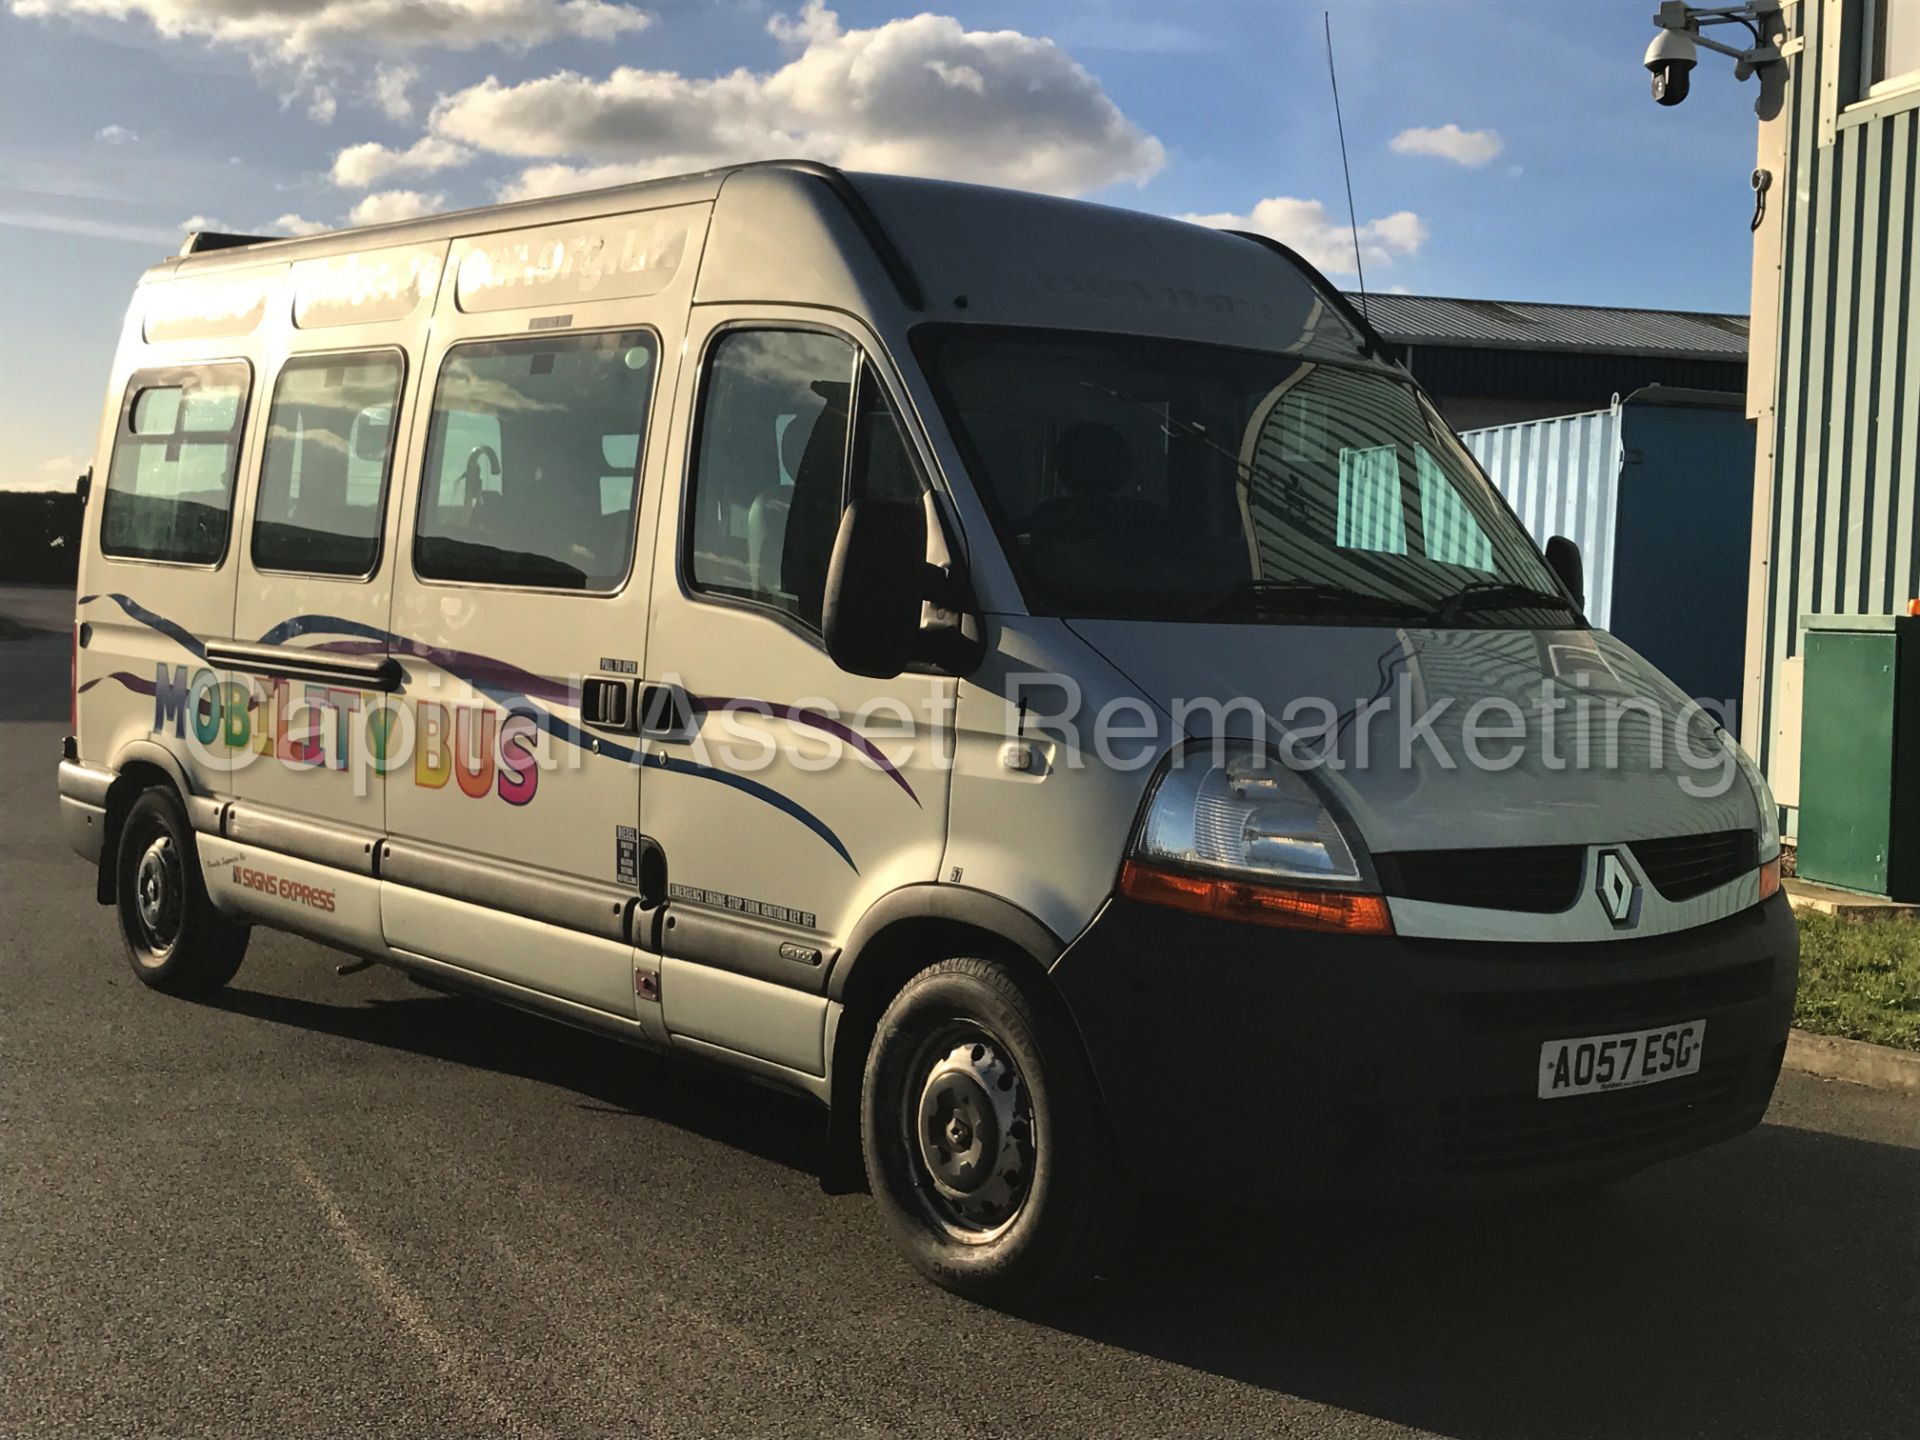 (On Sale) RENAULT MASTER '12 SEATER BUS' (2008 MODEL) 'AUTO - COACH INTERIOR - CHAIR LIFT' (NO VAT) - Image 2 of 29